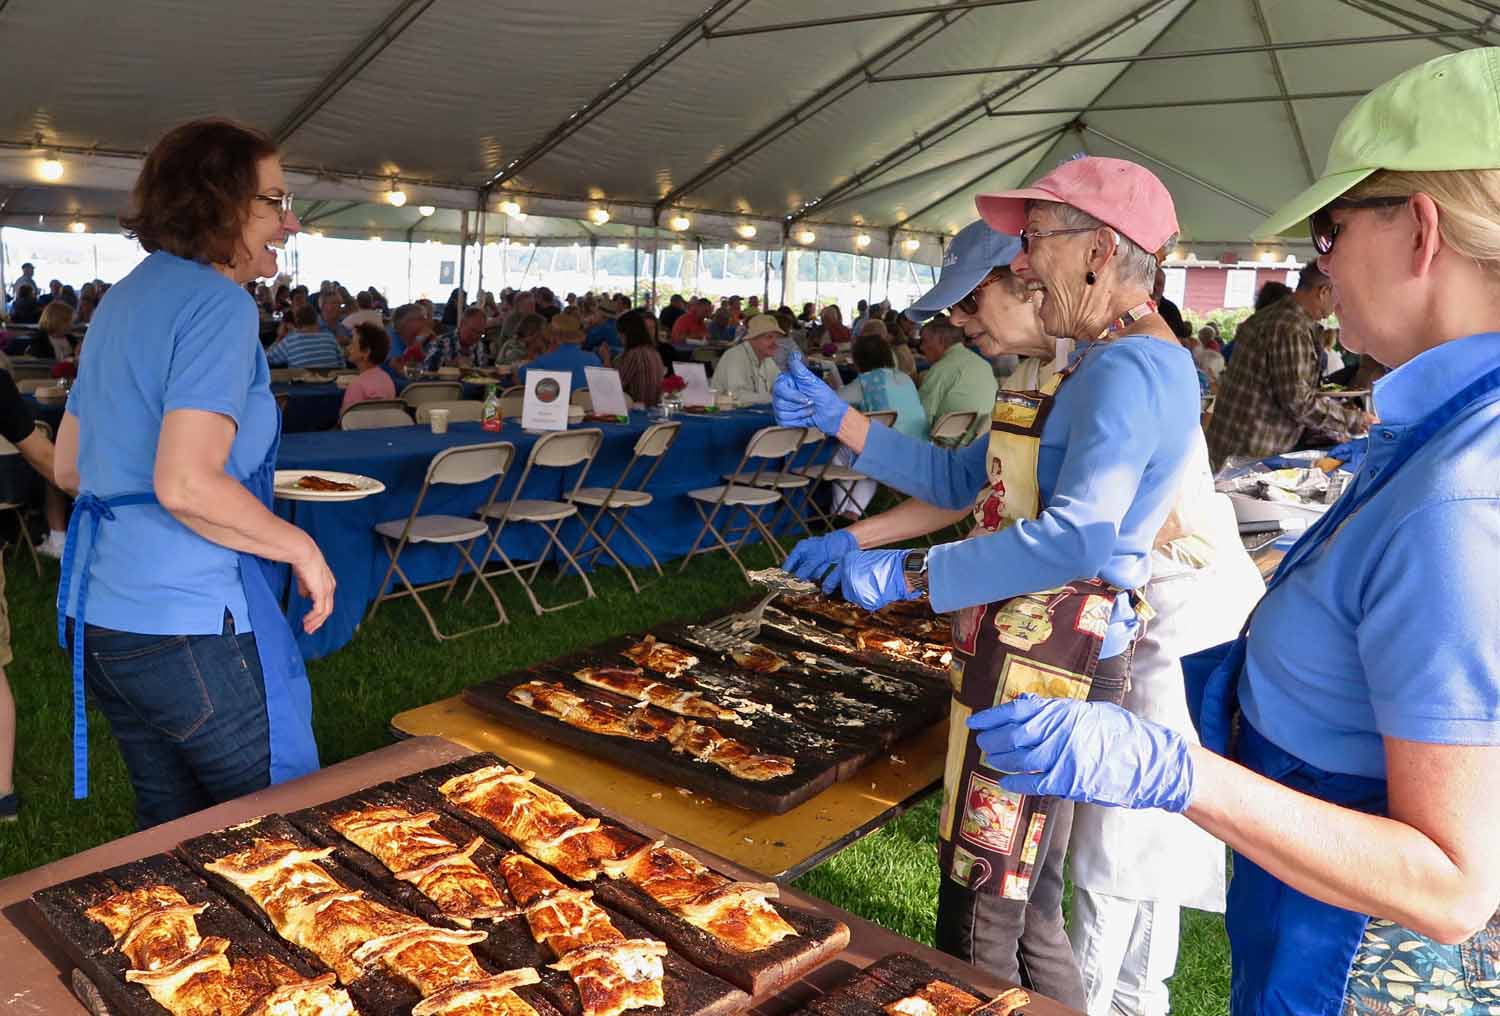 he 61st Essex Annual Shad Bake relies on dozens of volunteers as servers, setup crews and cooks.